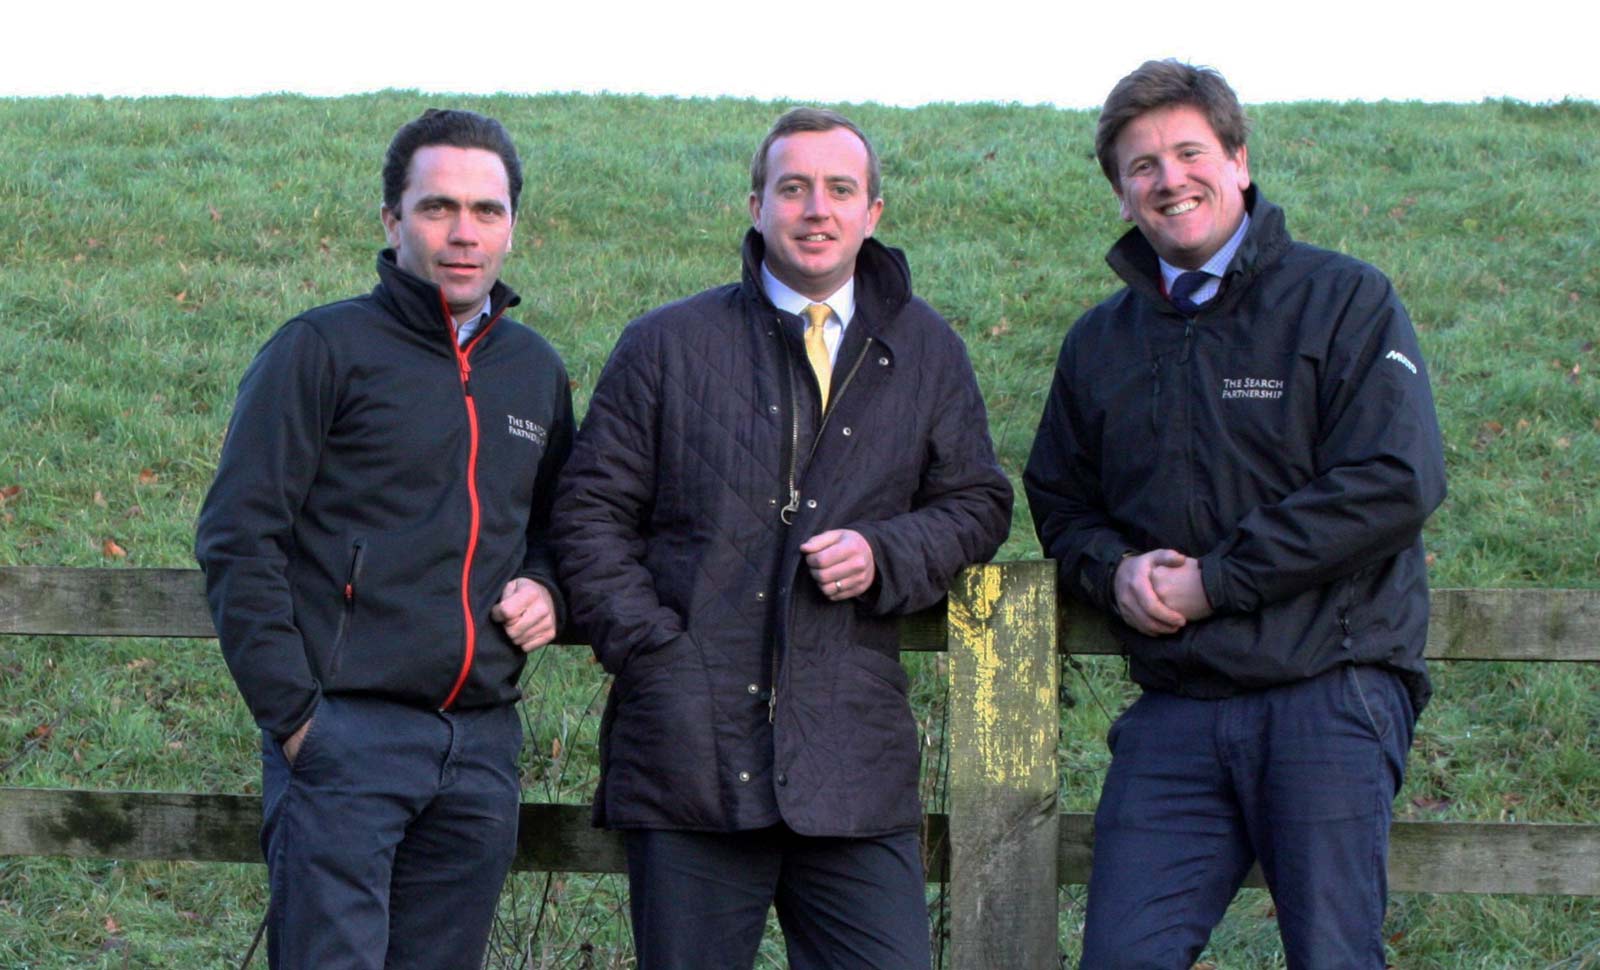 Toby Milbank, Steven Fieldsend and Tom Robinson celebrate the launch of The Land Management Partnership – part of The Search Partnership